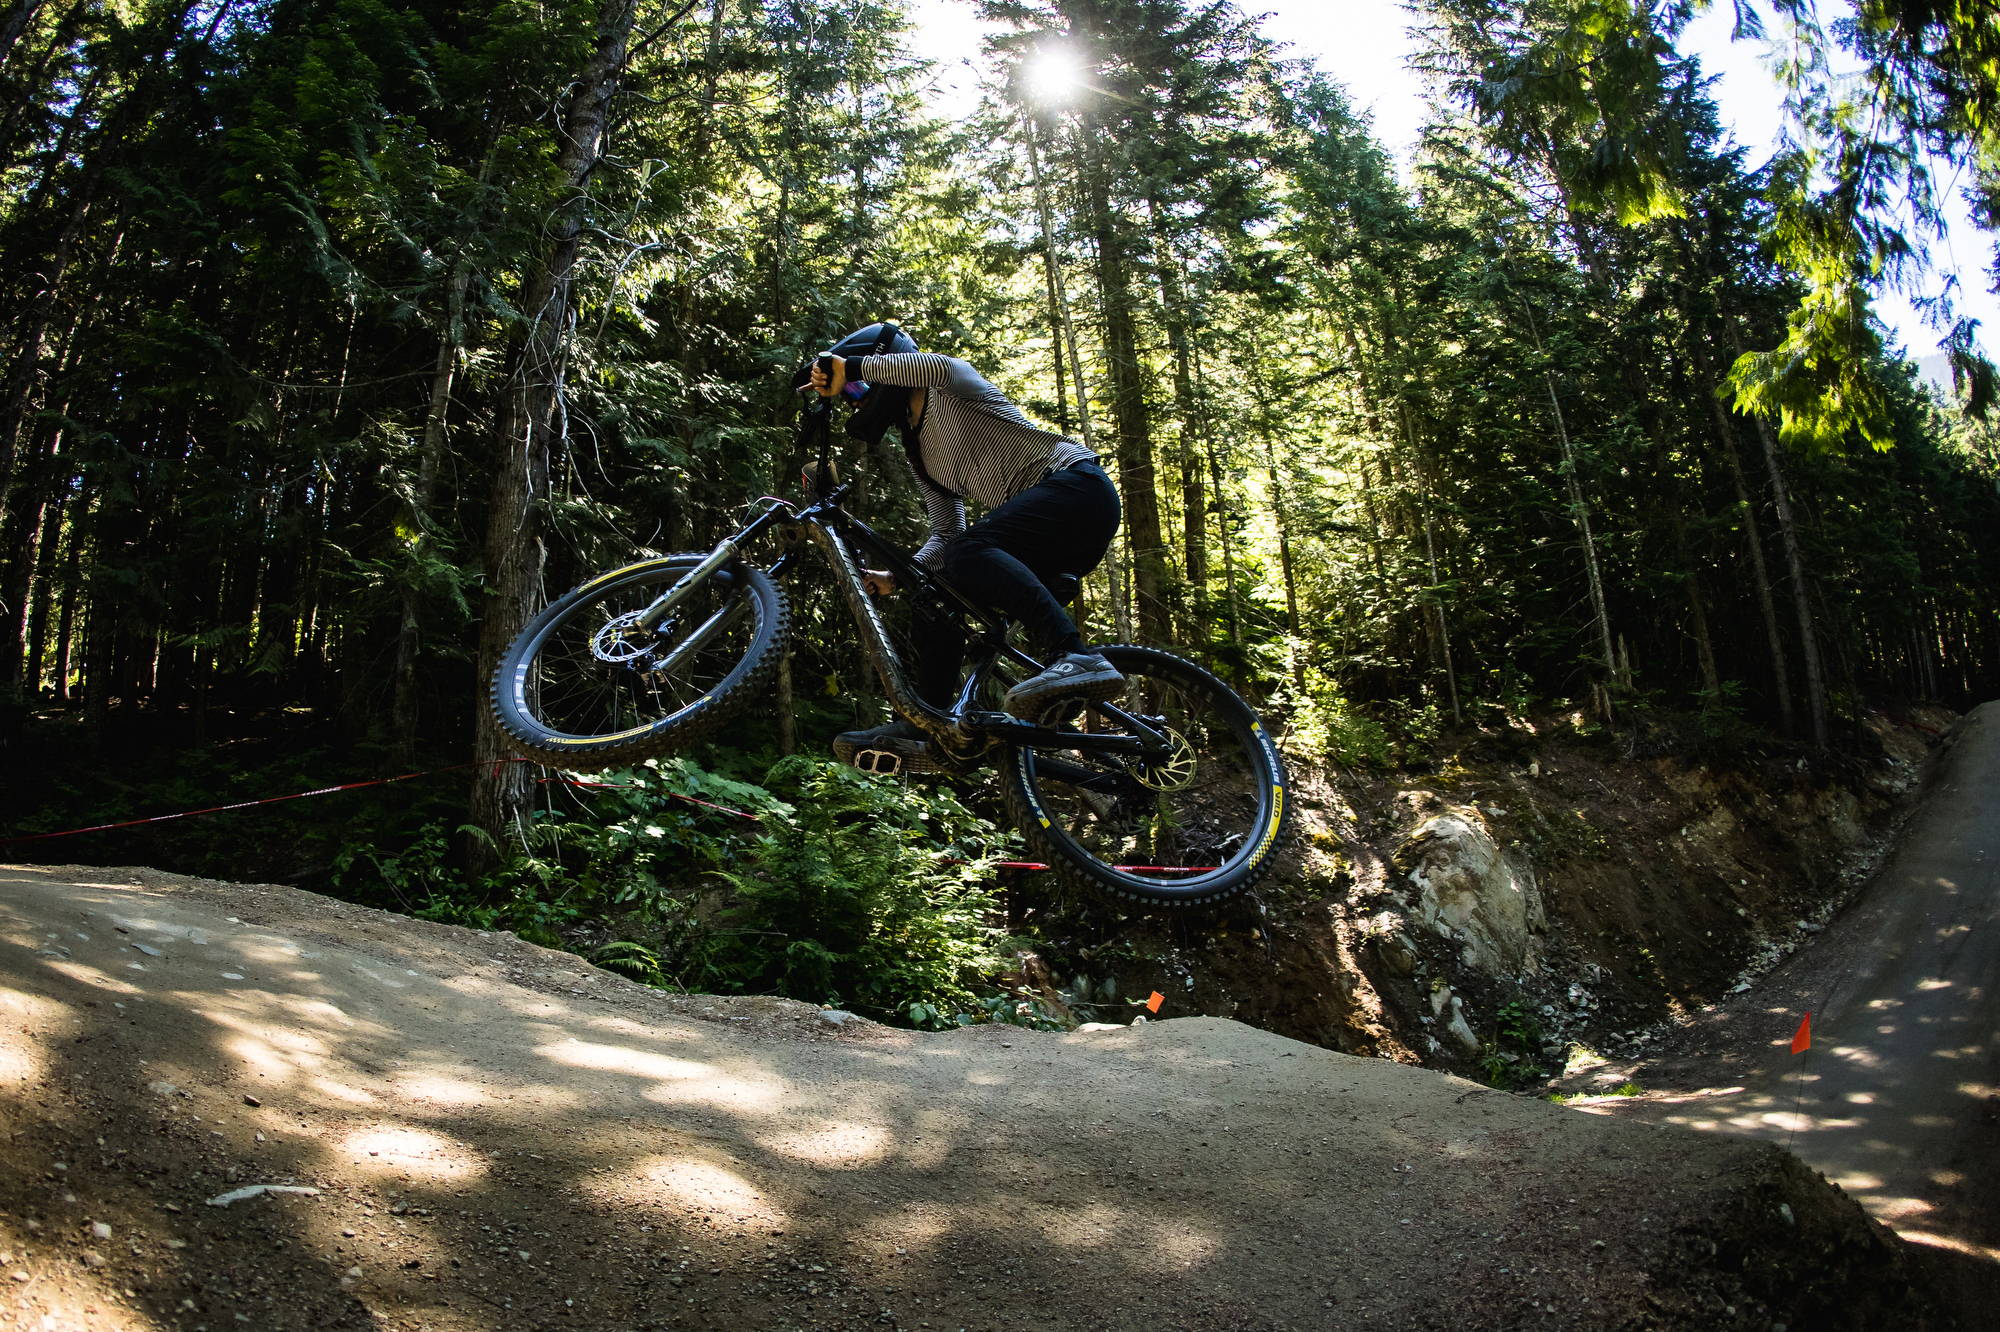 A Nukeproof rider on a Giga at Whistler bike park